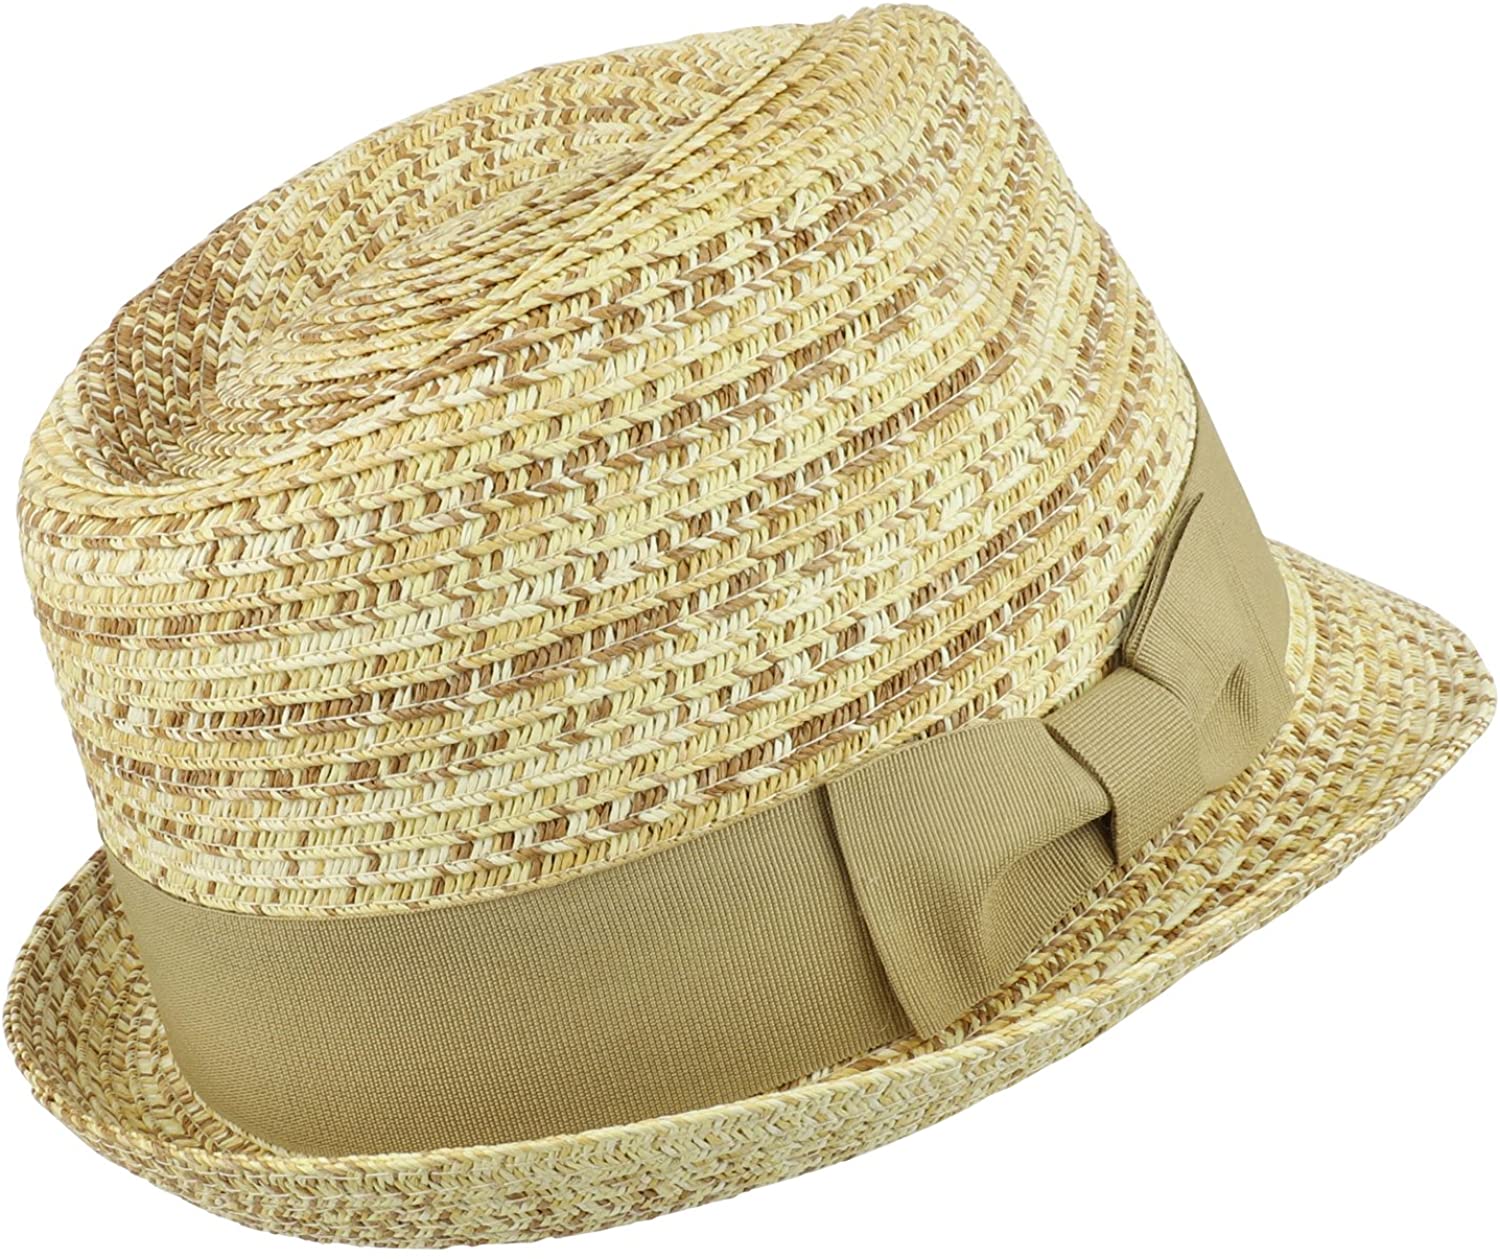 Armycrew Lightweight Straw Fedora Hat with Pleated Bow Band